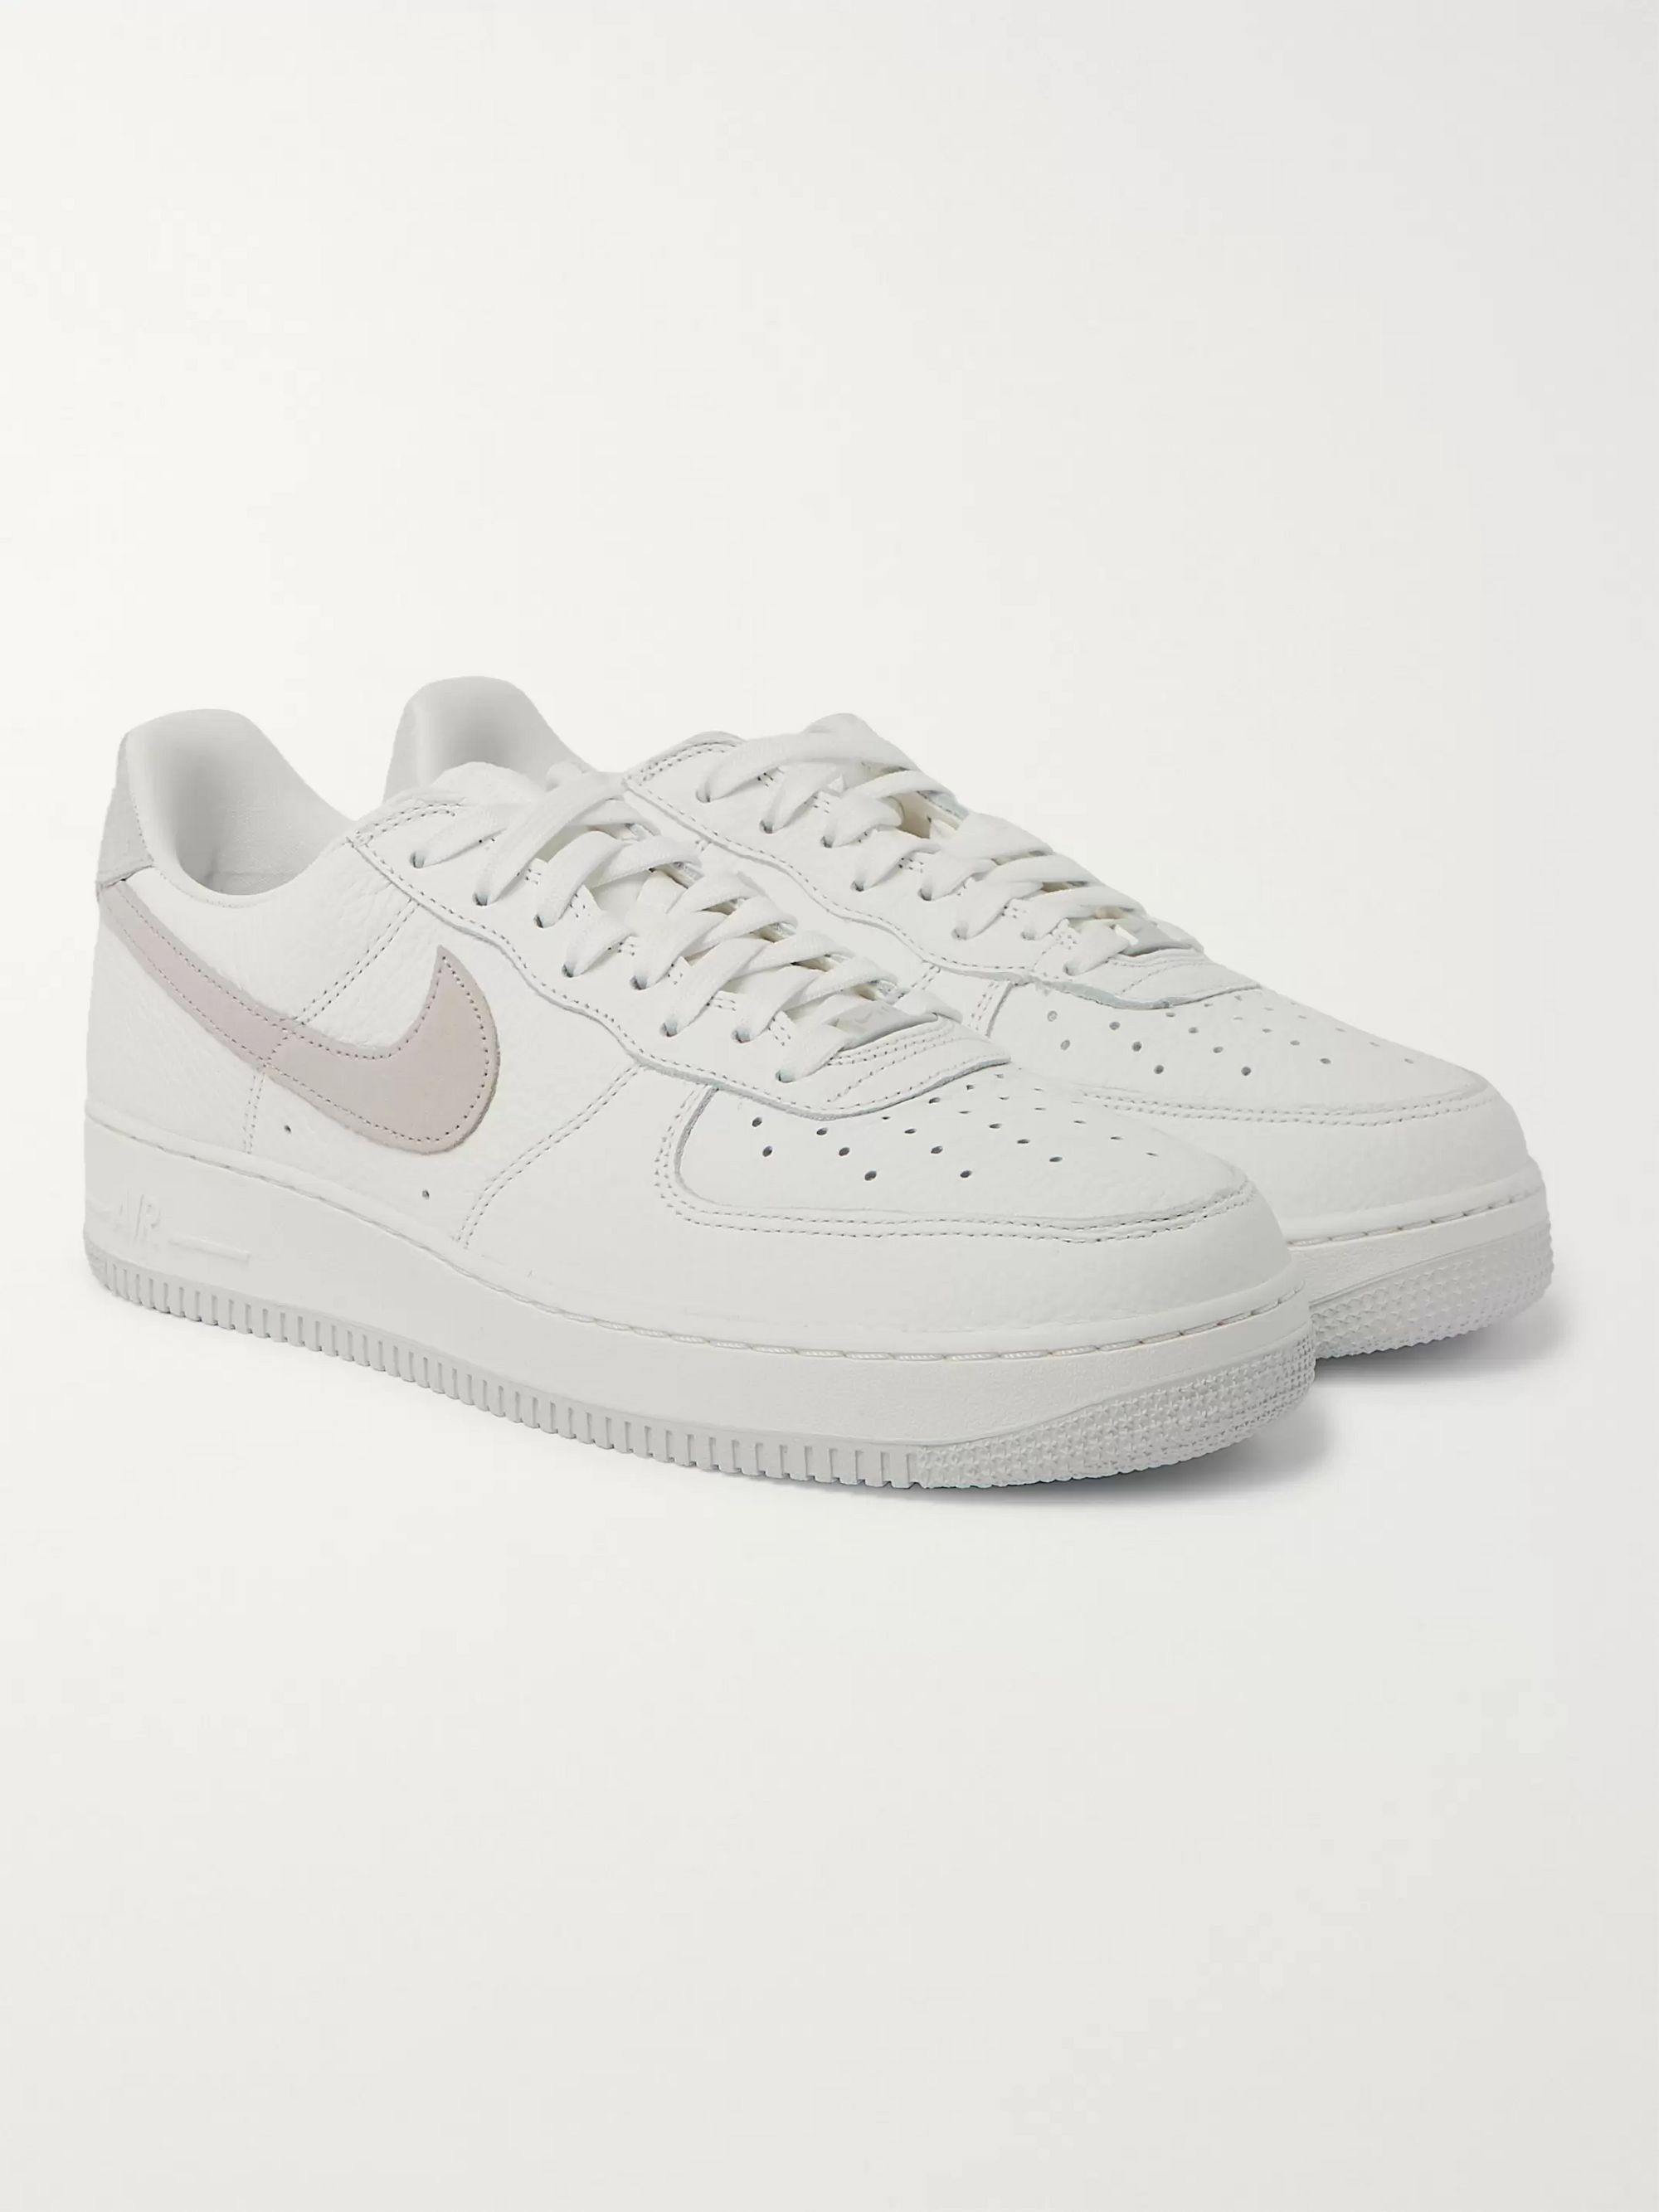 White Air Force 1 07 Suede-Trimmed Full-Grain Leather Sneakers | NIKE | MR  PORTER